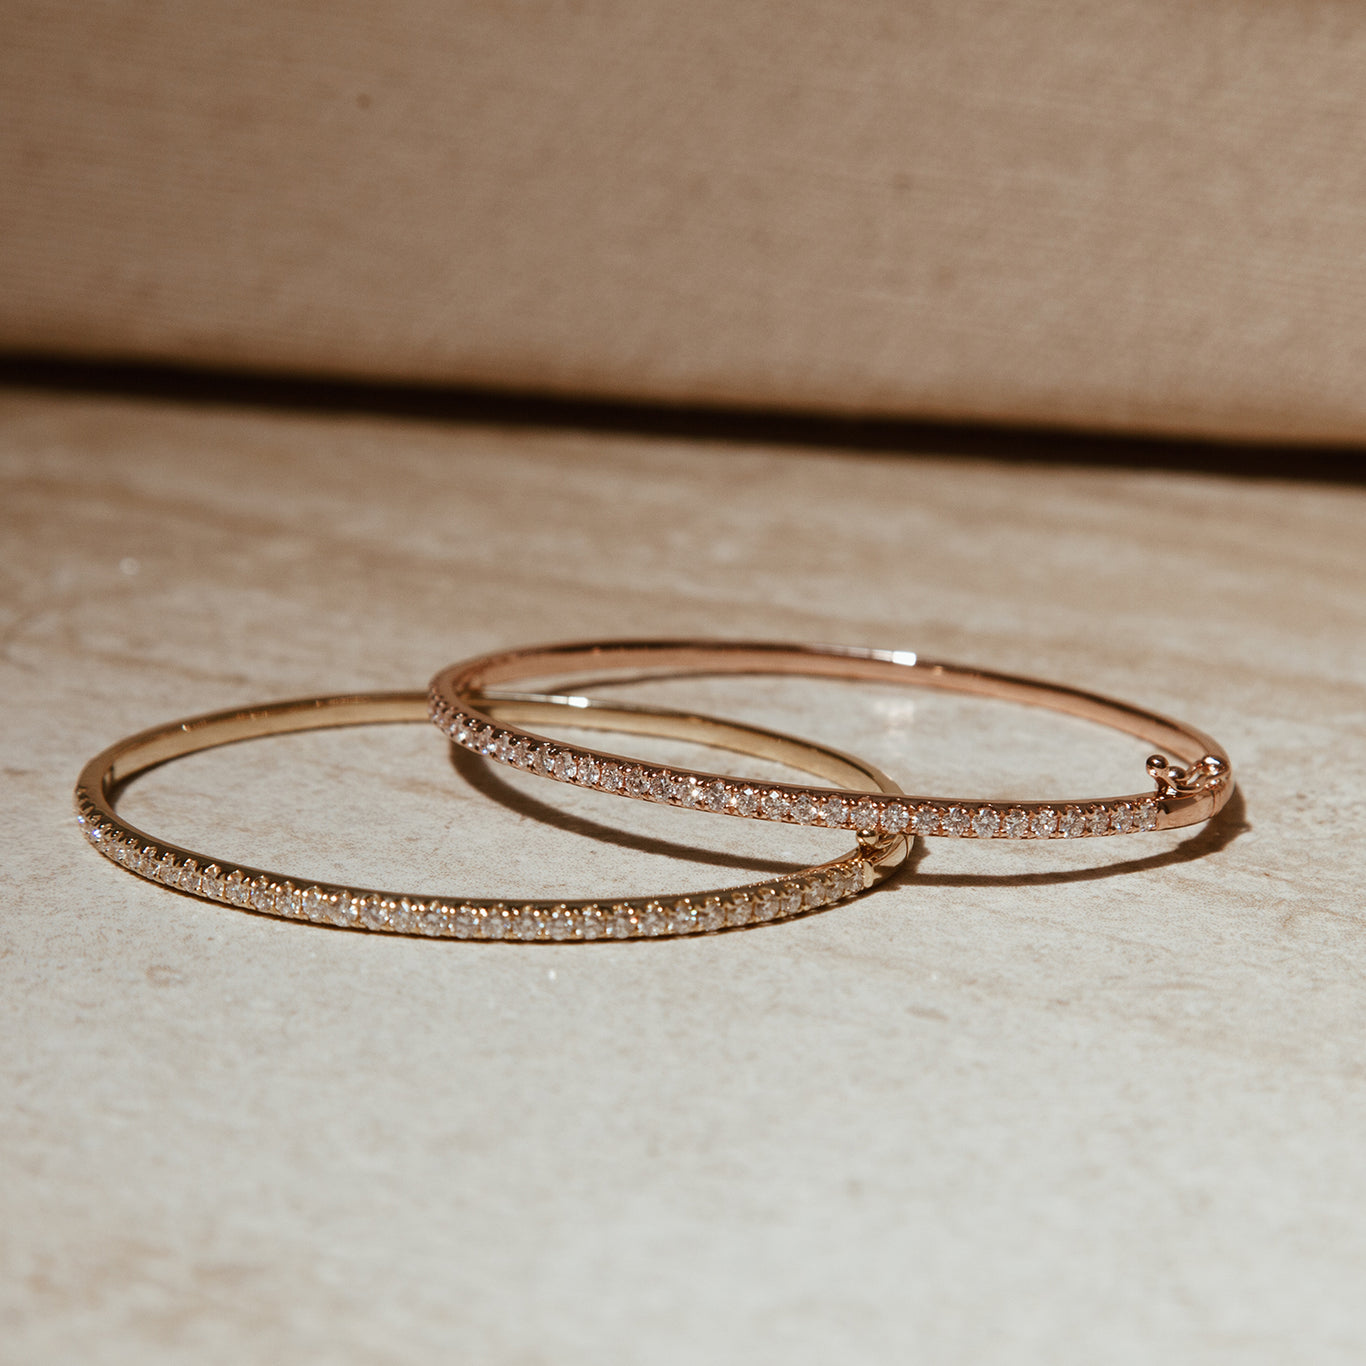 The Classic Diamond Bangles shown in rose and yellow gold.